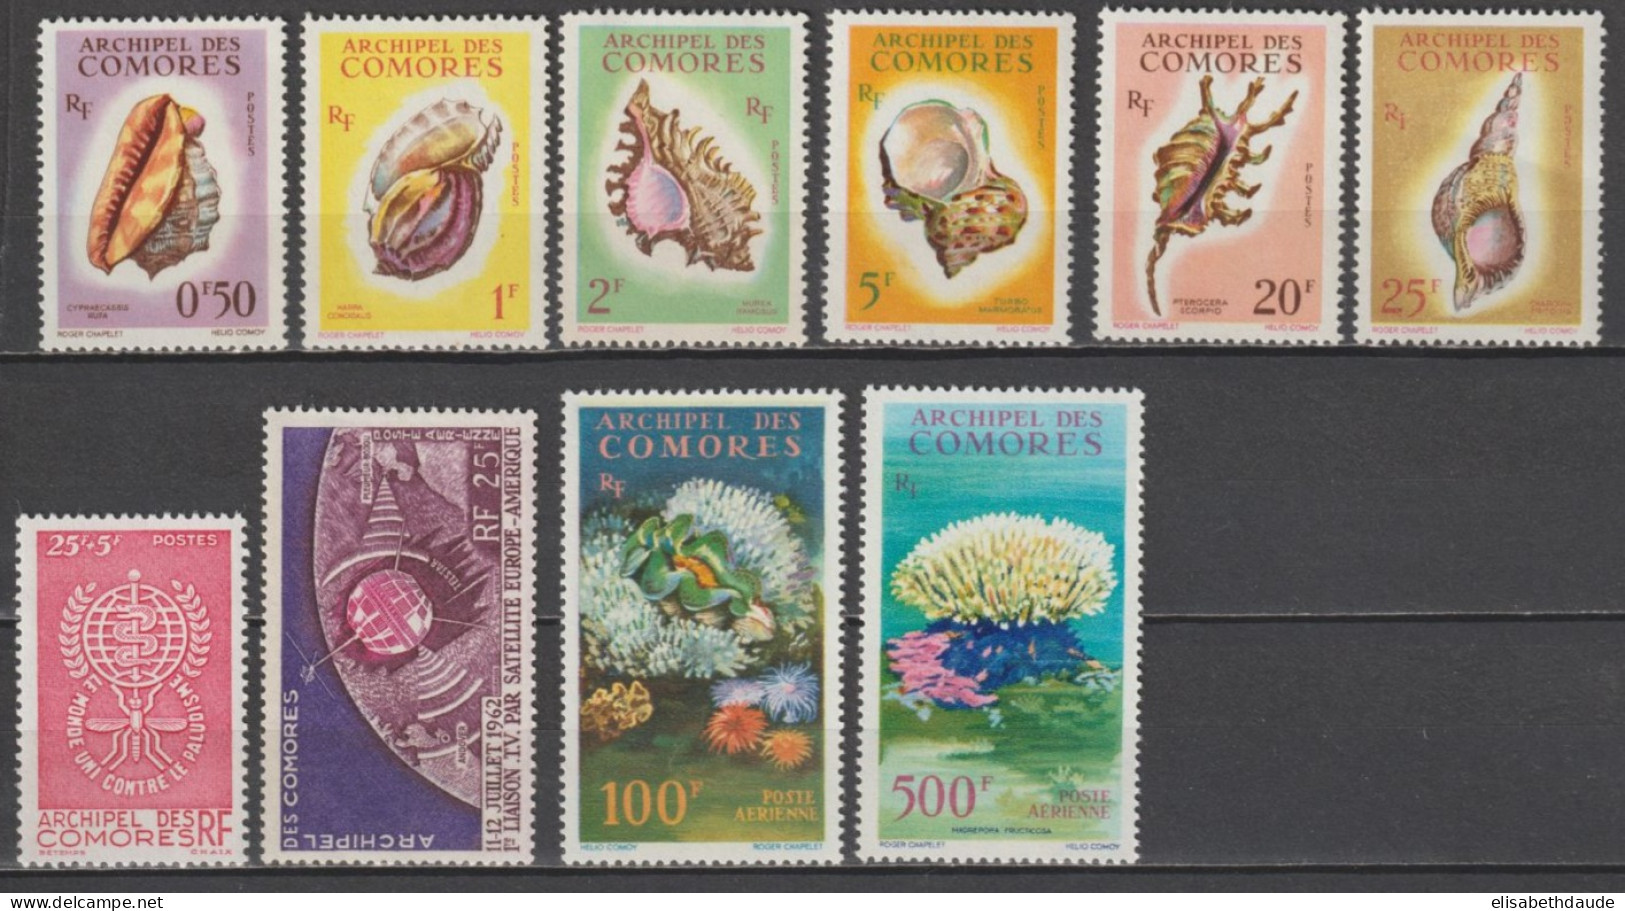 COMORES - 1962 - ANNEE COMPLETE Avec POSTE AERIENNE - YVERT N°19/25 + A5/7 ** MNH  - COTE = 110.5 EUR. - Unused Stamps